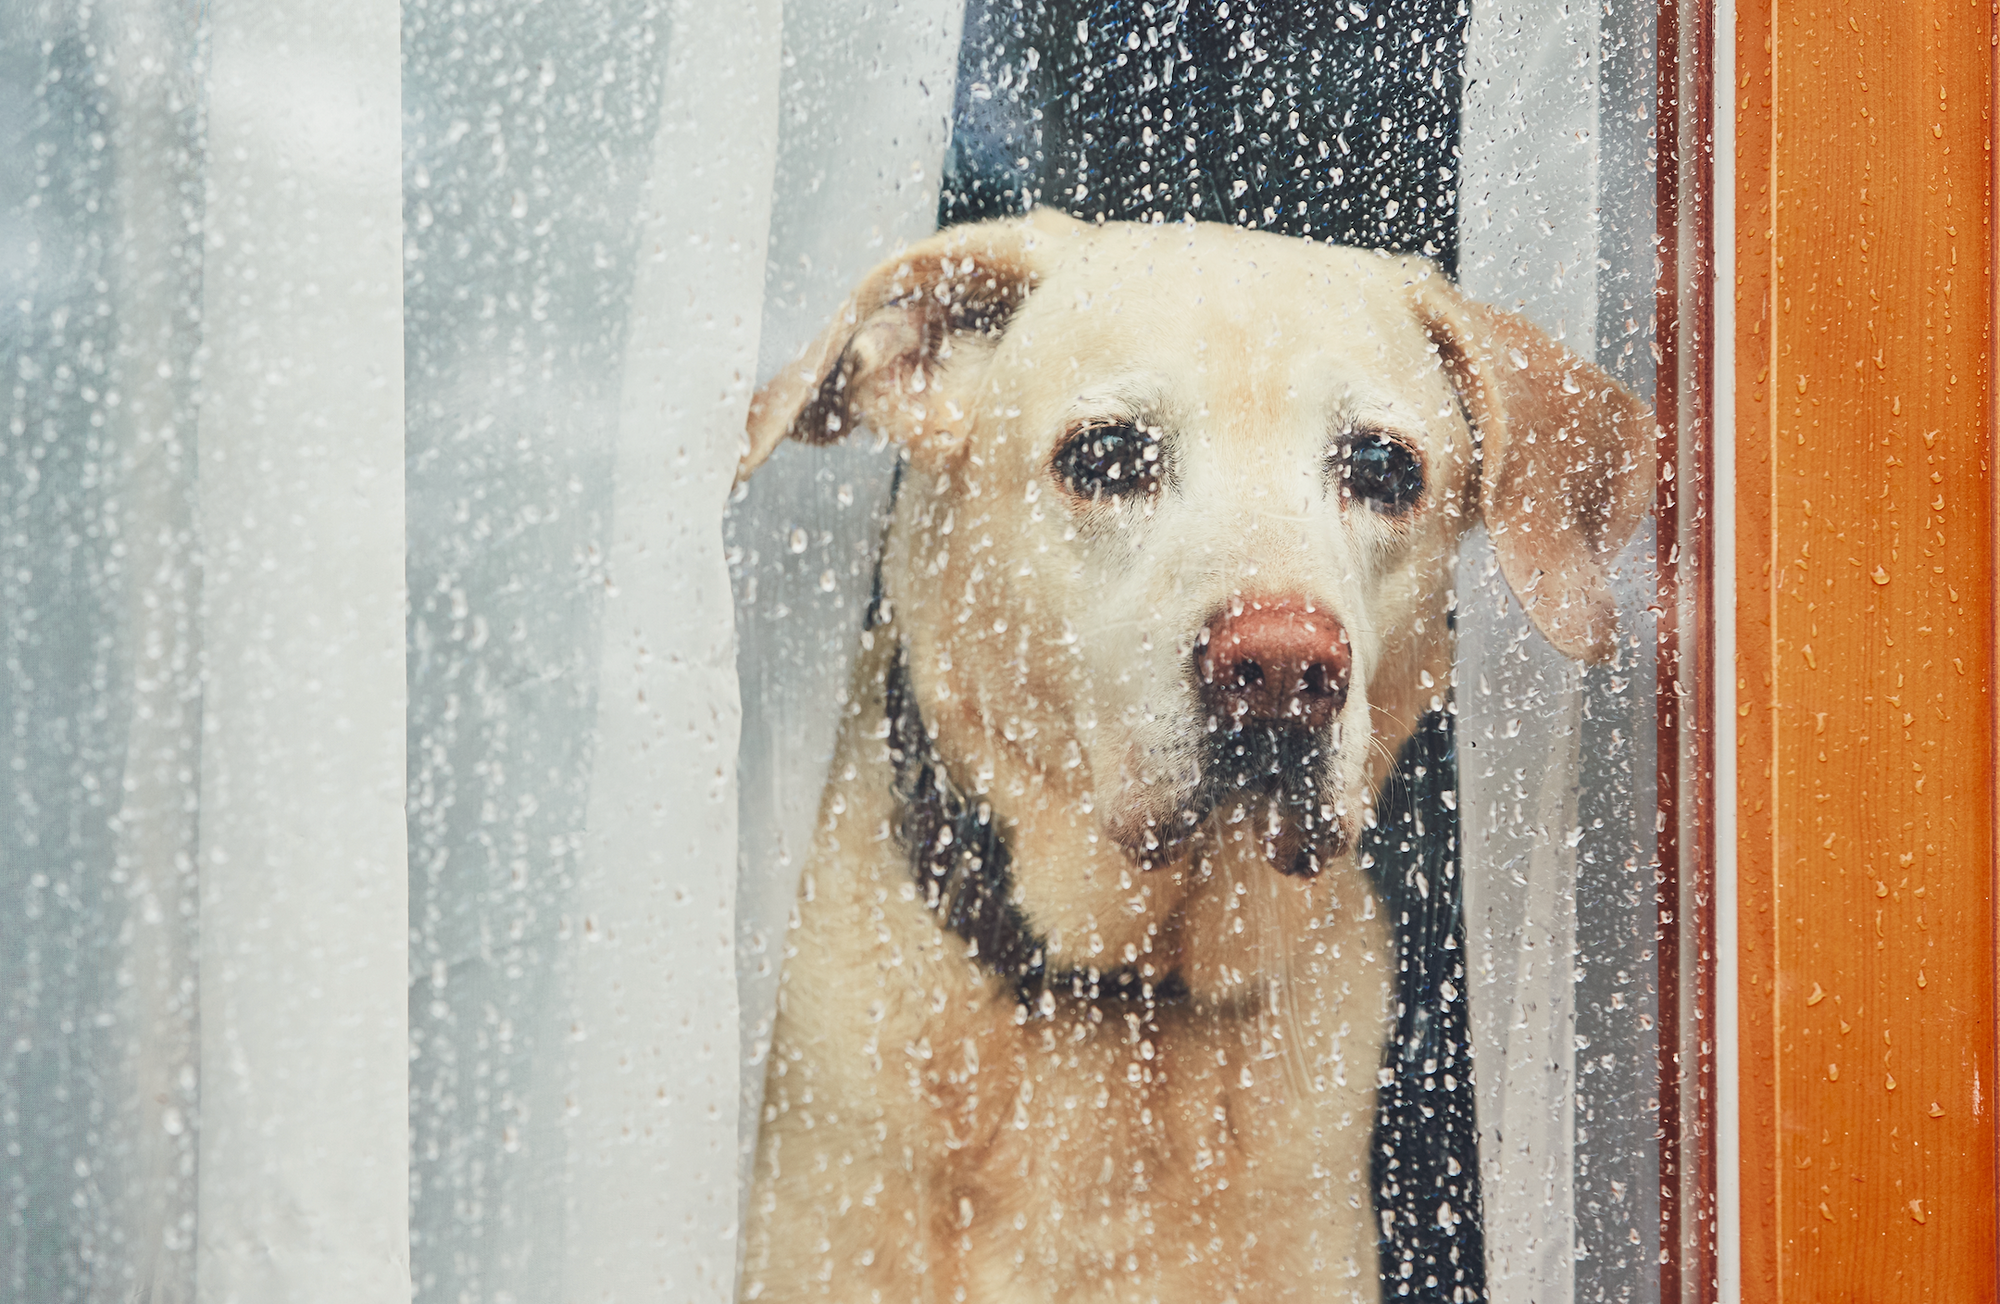 A dog looking through a wet window with water drops.